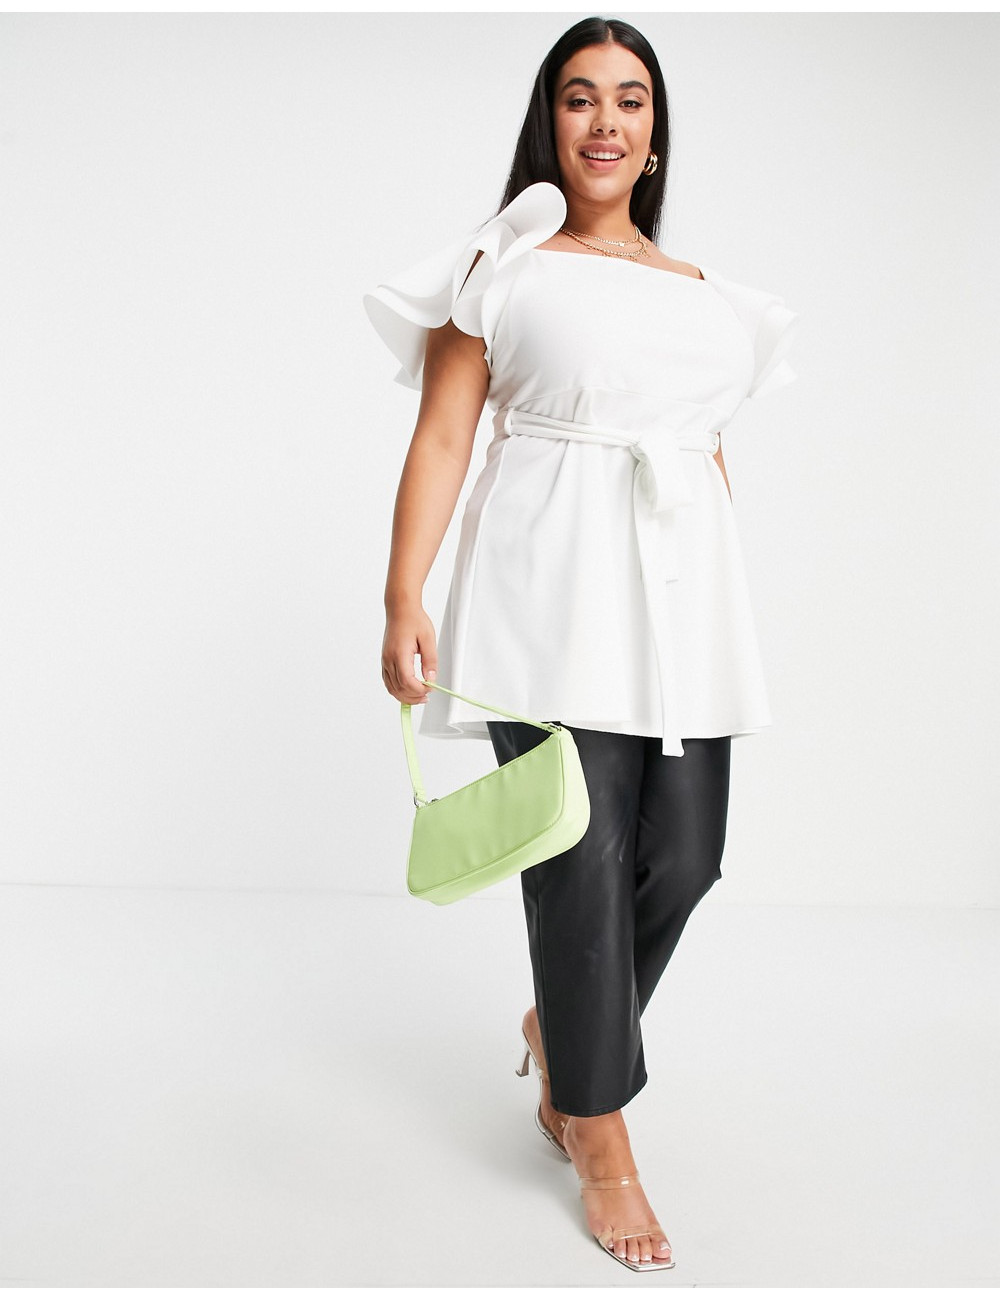 Yours peplum top in white